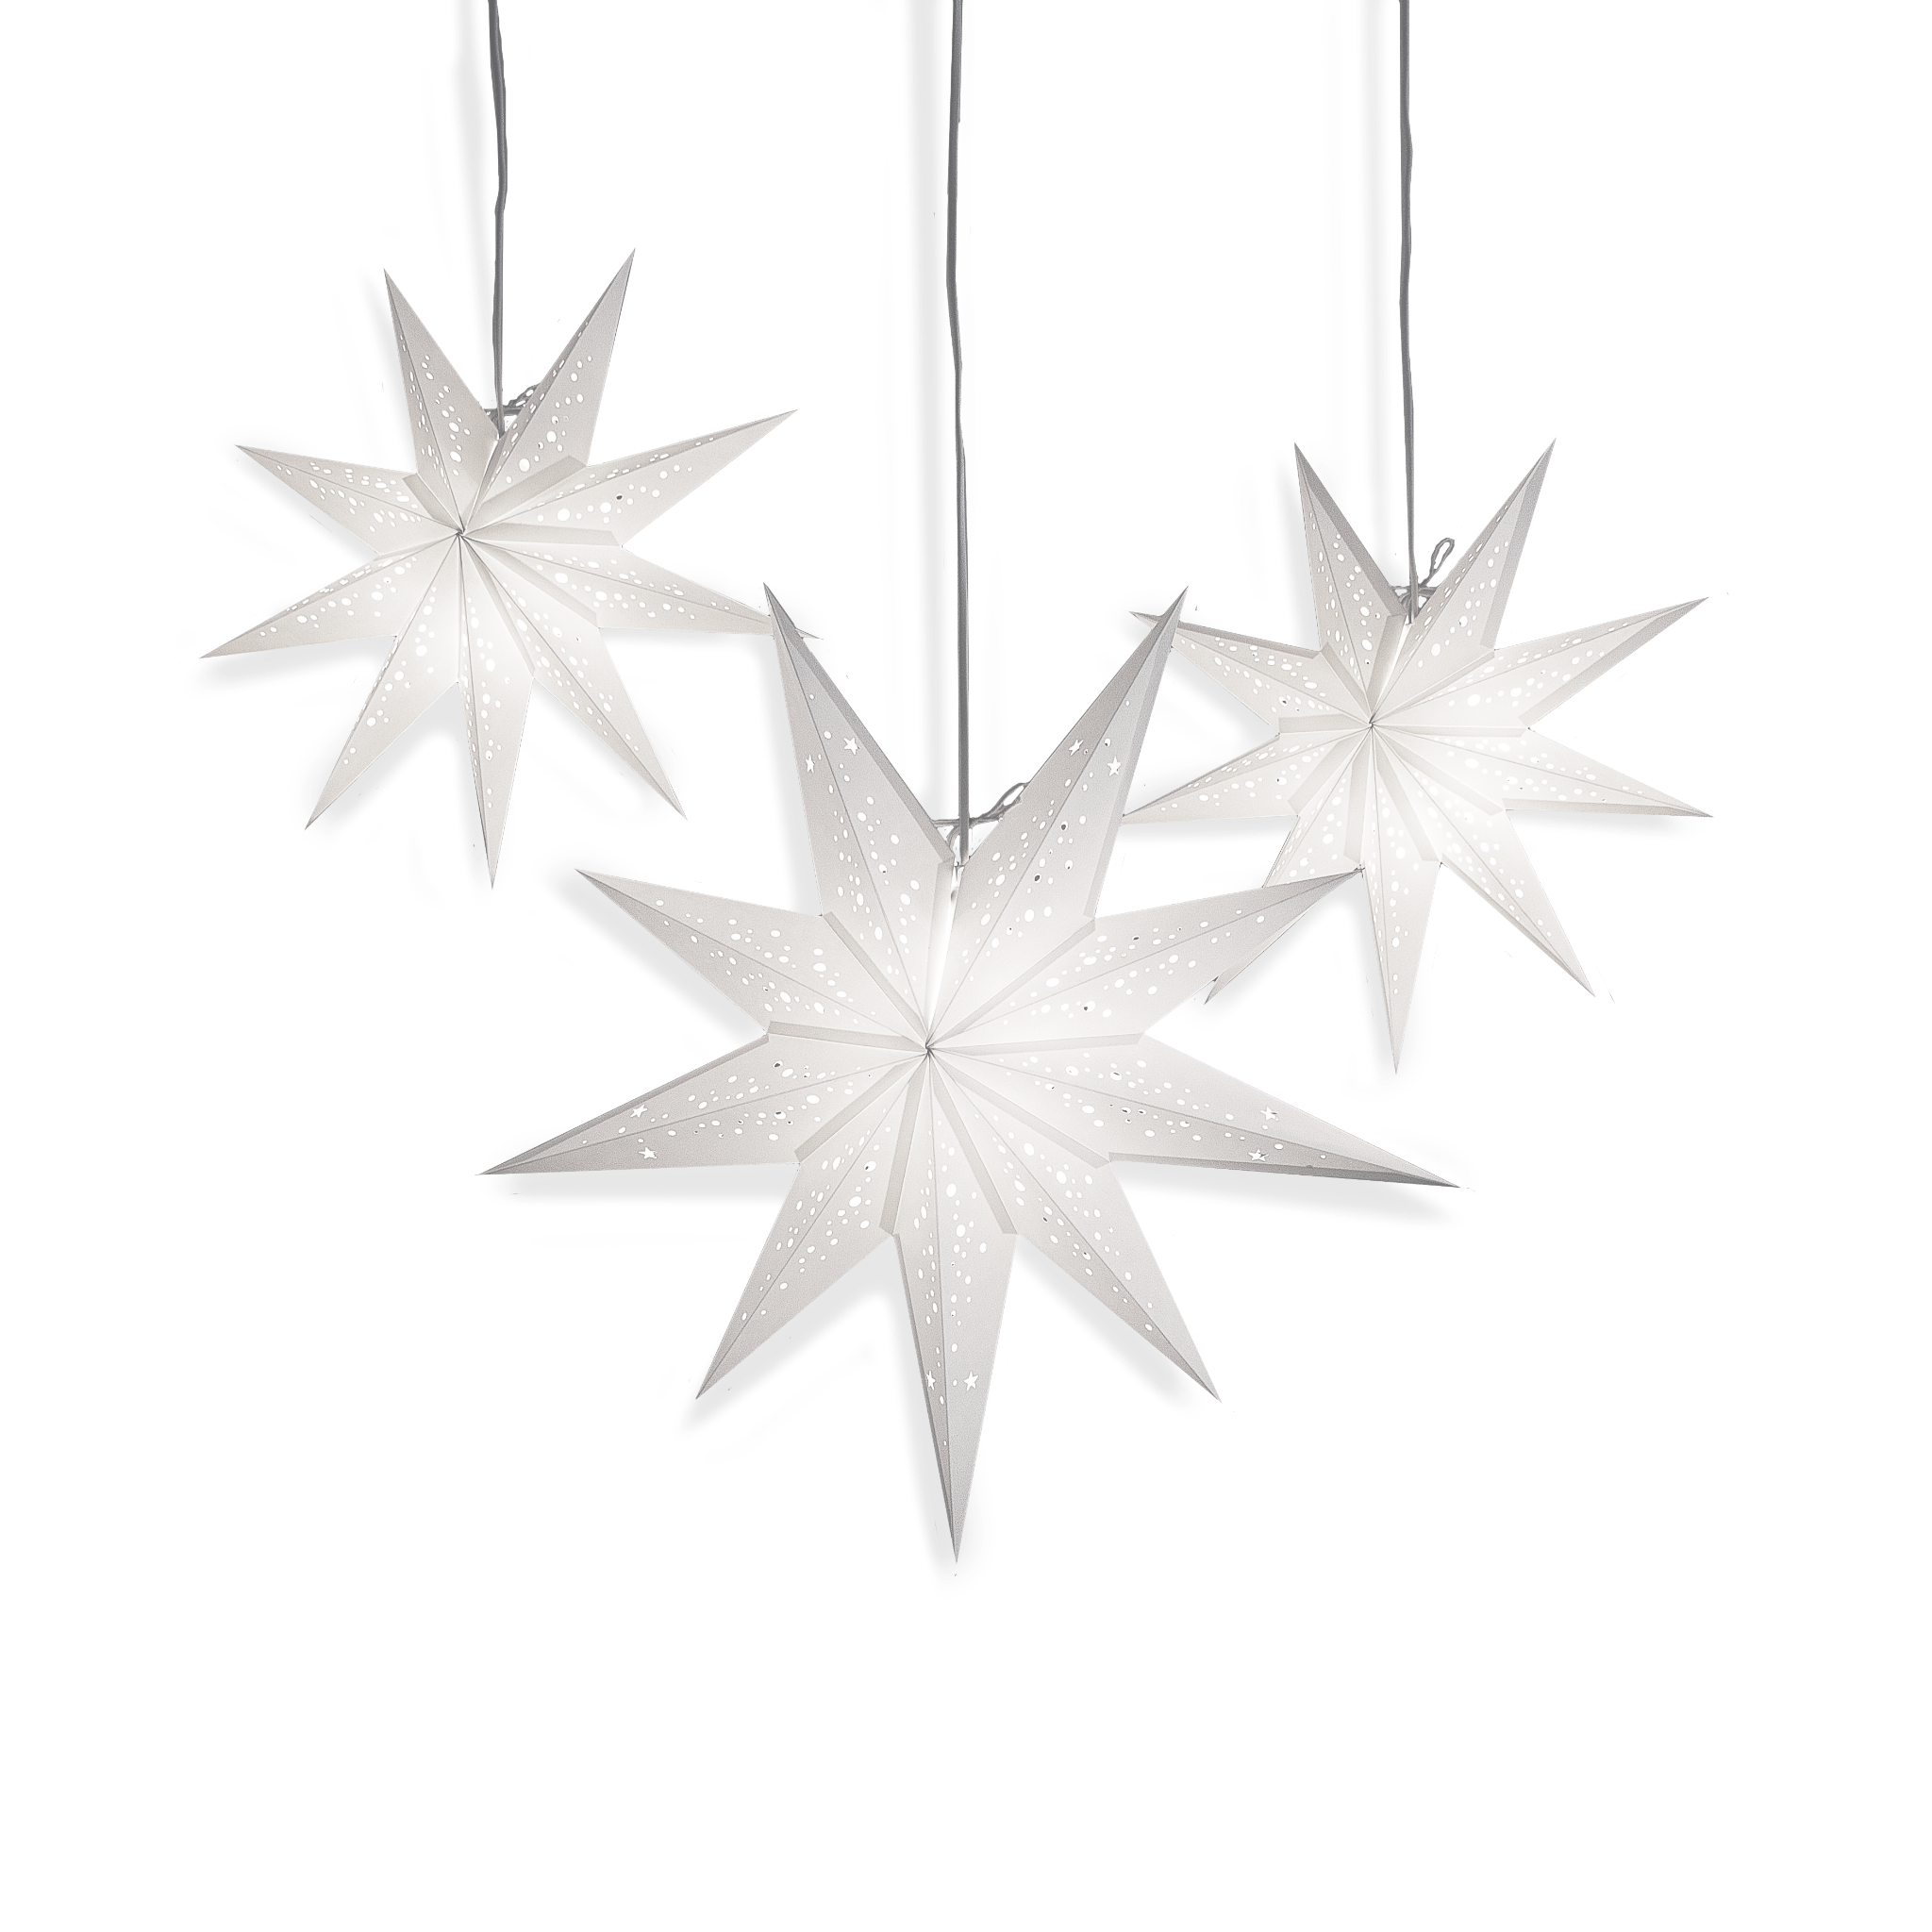 2 small and 1 regular white 9 point star lanterns